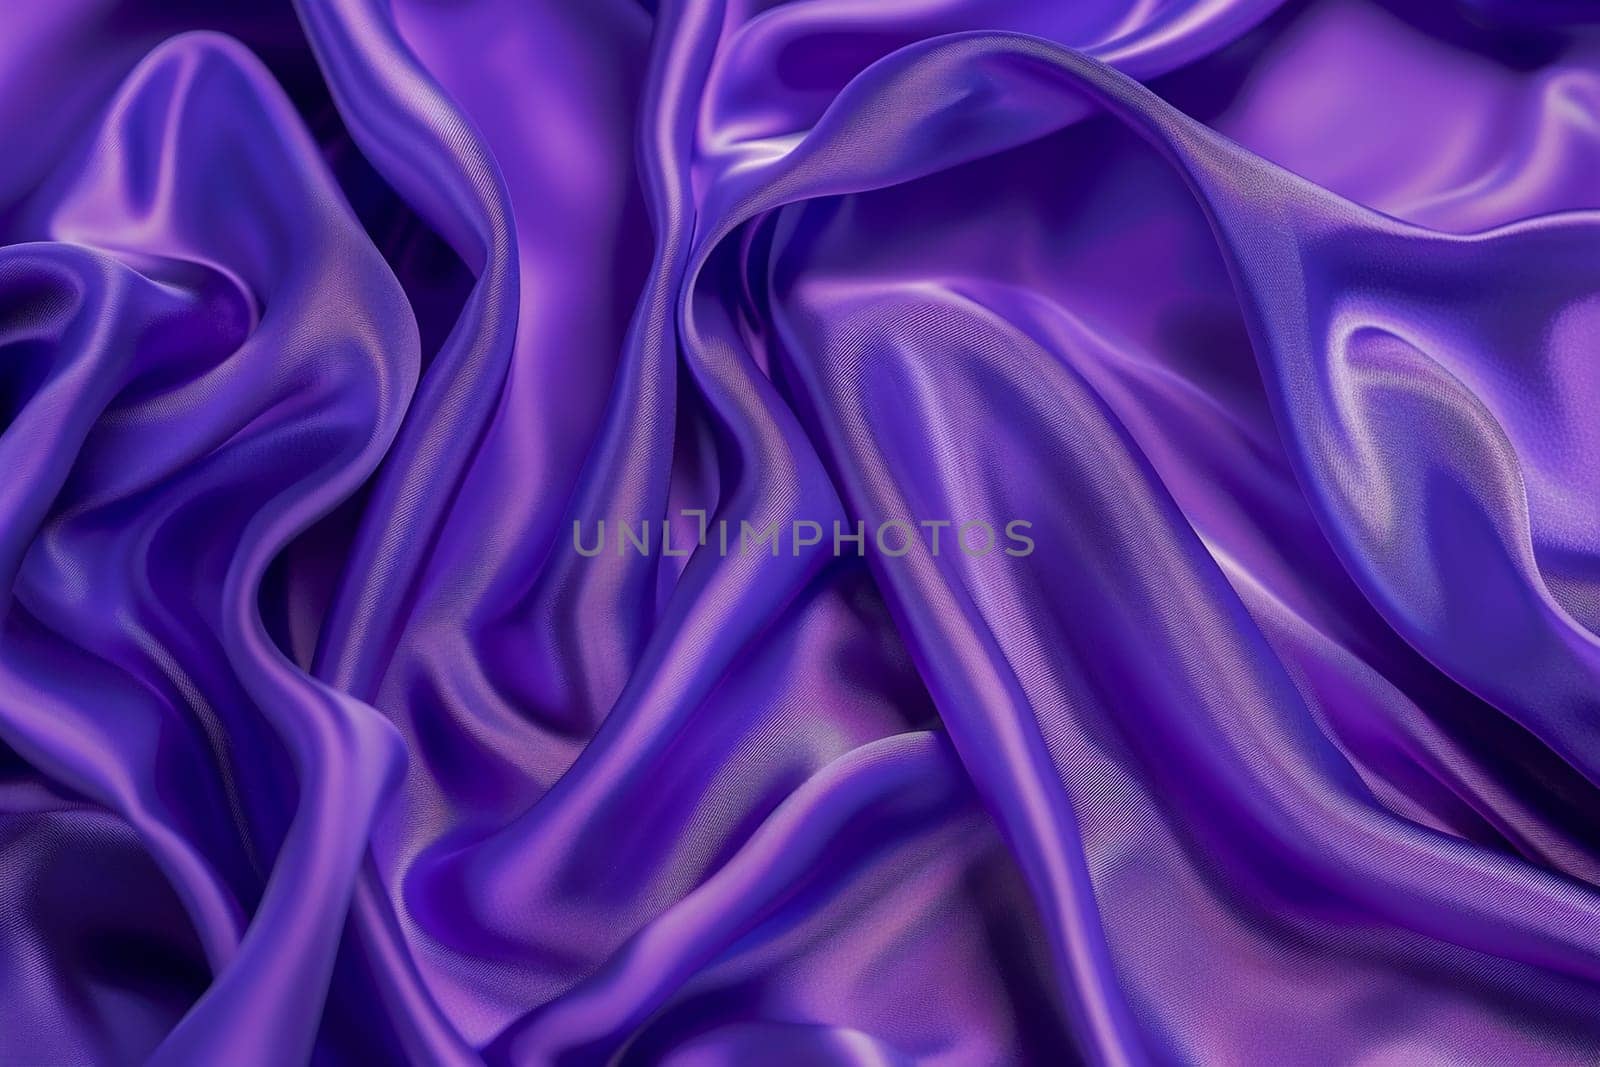 Elegant purple silk fabric with a luxurious texture, perfect for backgrounds in fashion or design projects, showcasing sophistication and style.